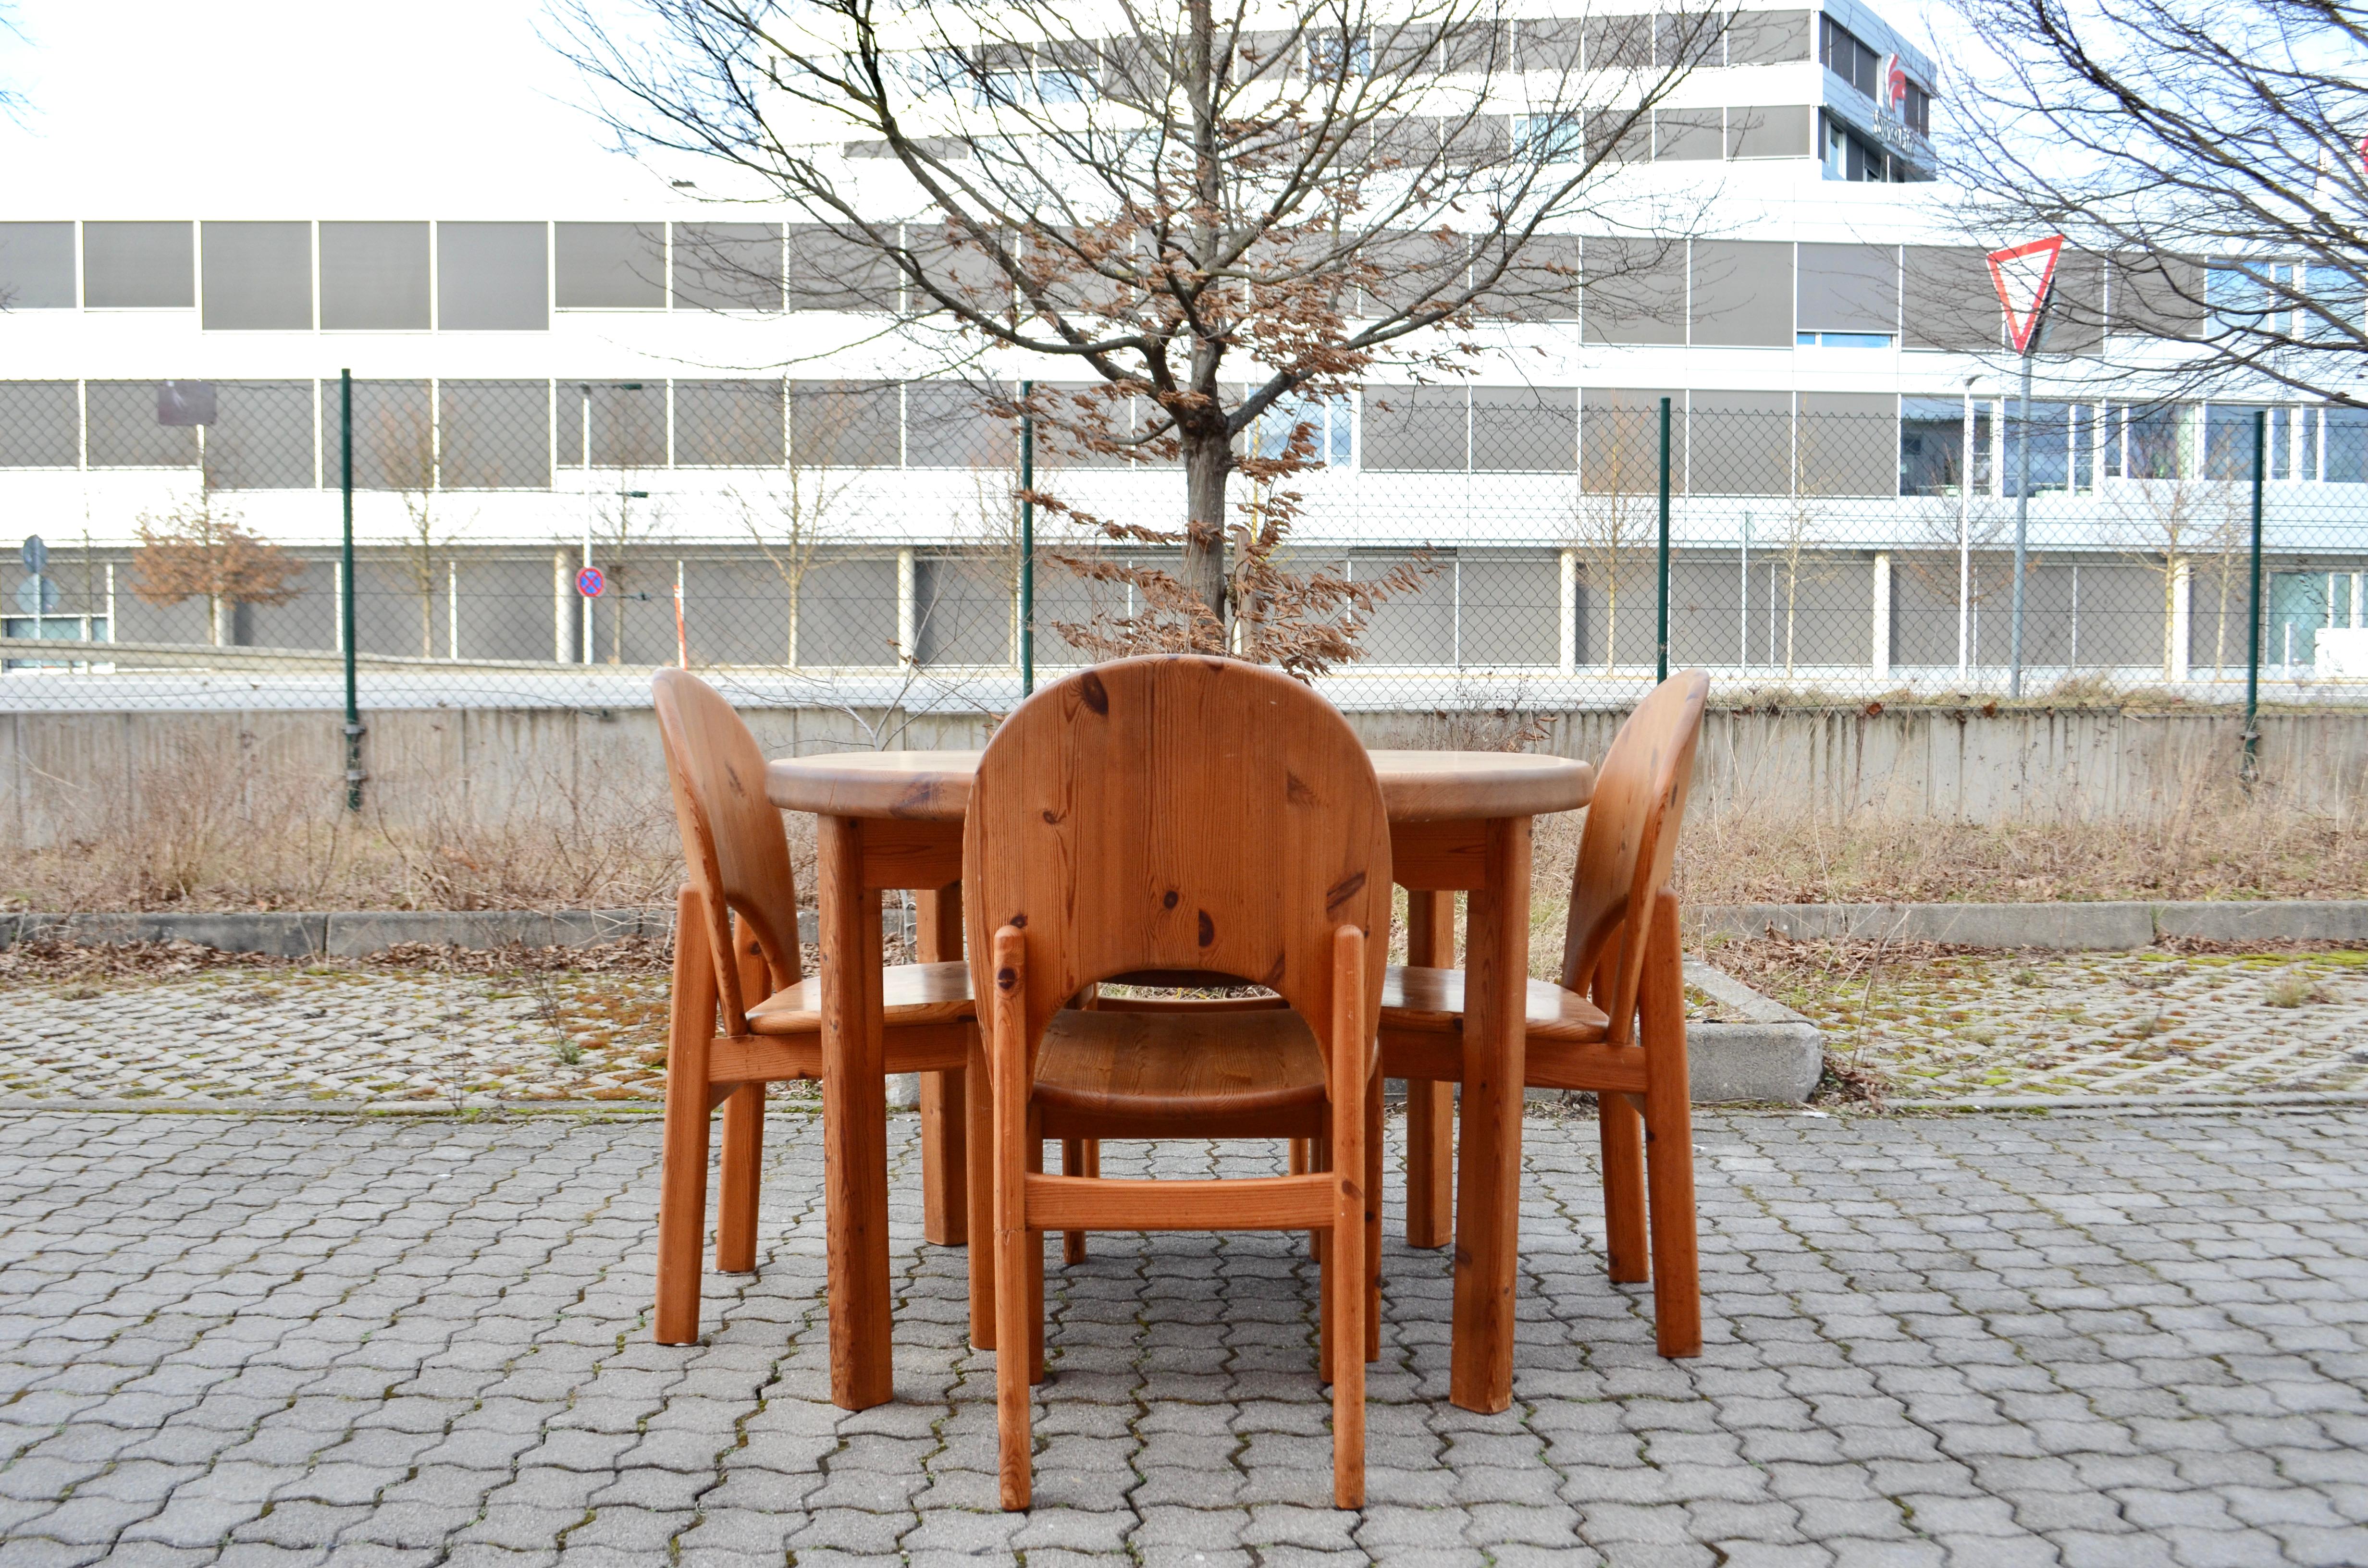 This gorgeous dining set is produced by Glostrup Mobler from Denmark.
The chairs are beautiful sculptured.
The back of the chair and the joints has some beautiful details.
It´s solid oiled scandinavian pine wood.
The dining table has an ellipse